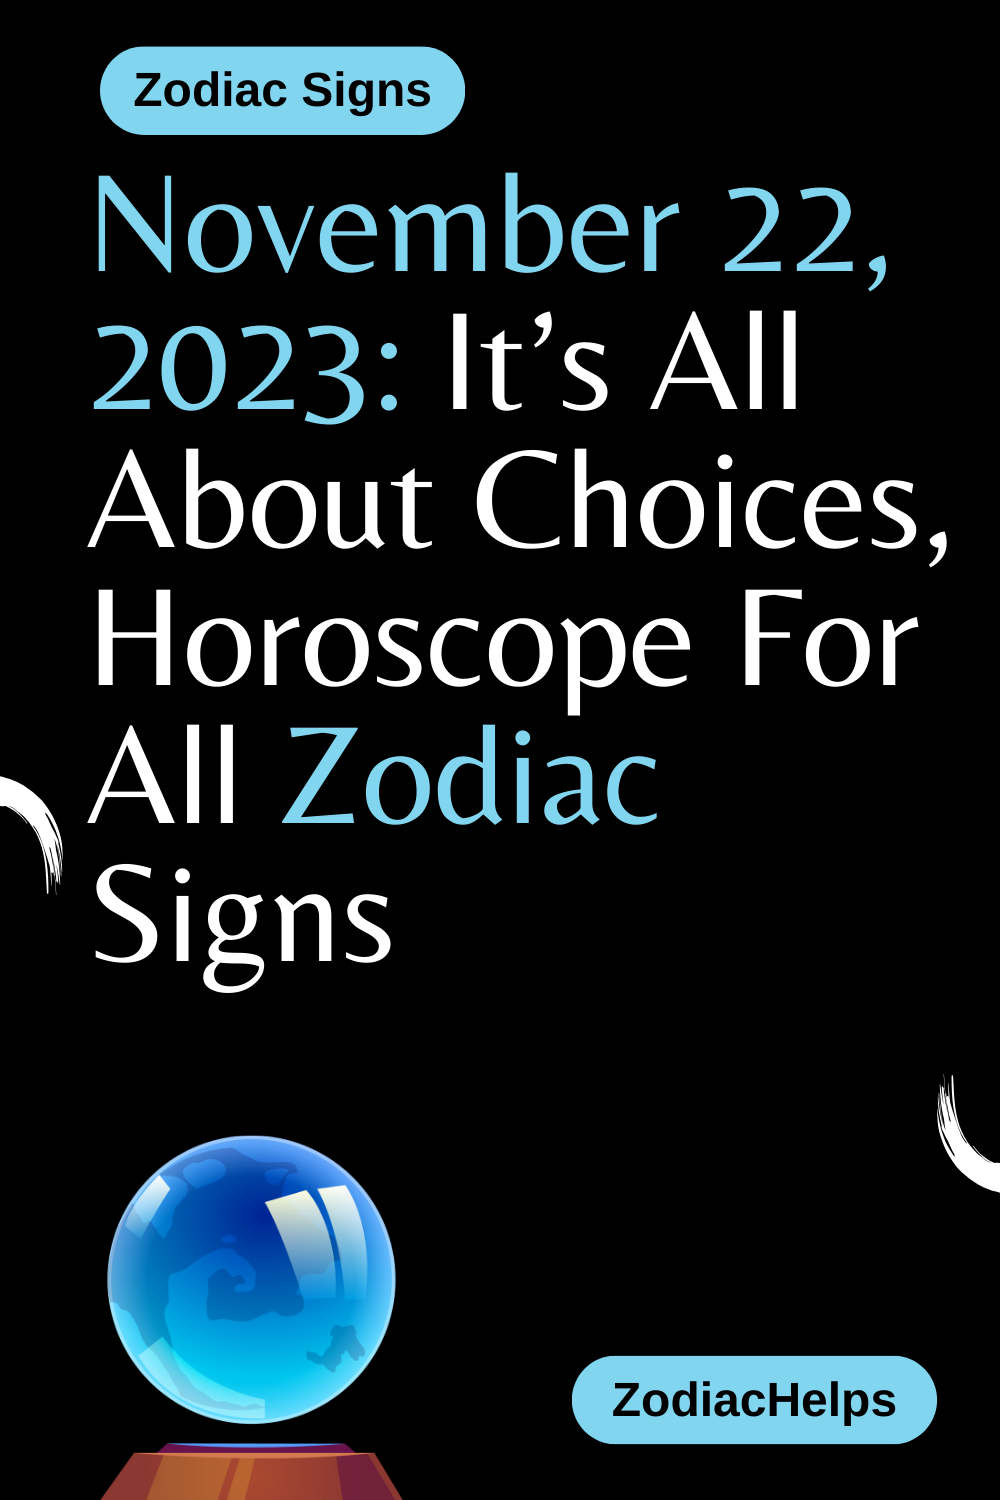 November 22, 2023 It’s All About Choices, Horoscope For All Zodiac Signs